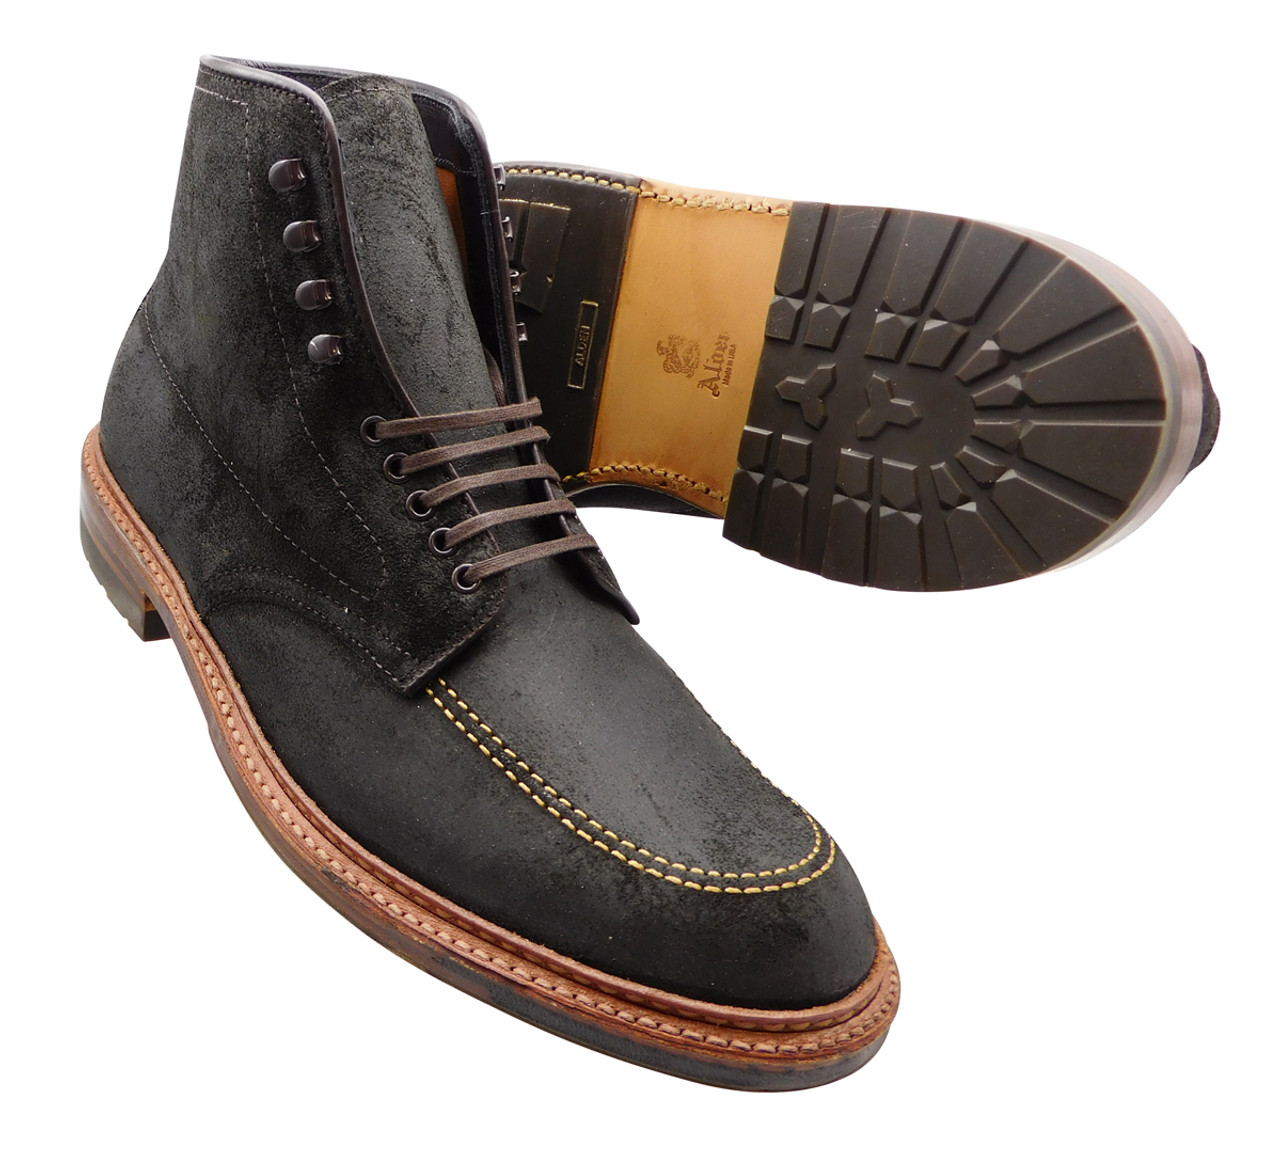 Alden Indy Boot Exclusive Version in Earth Chamois with Commando Sole # ...